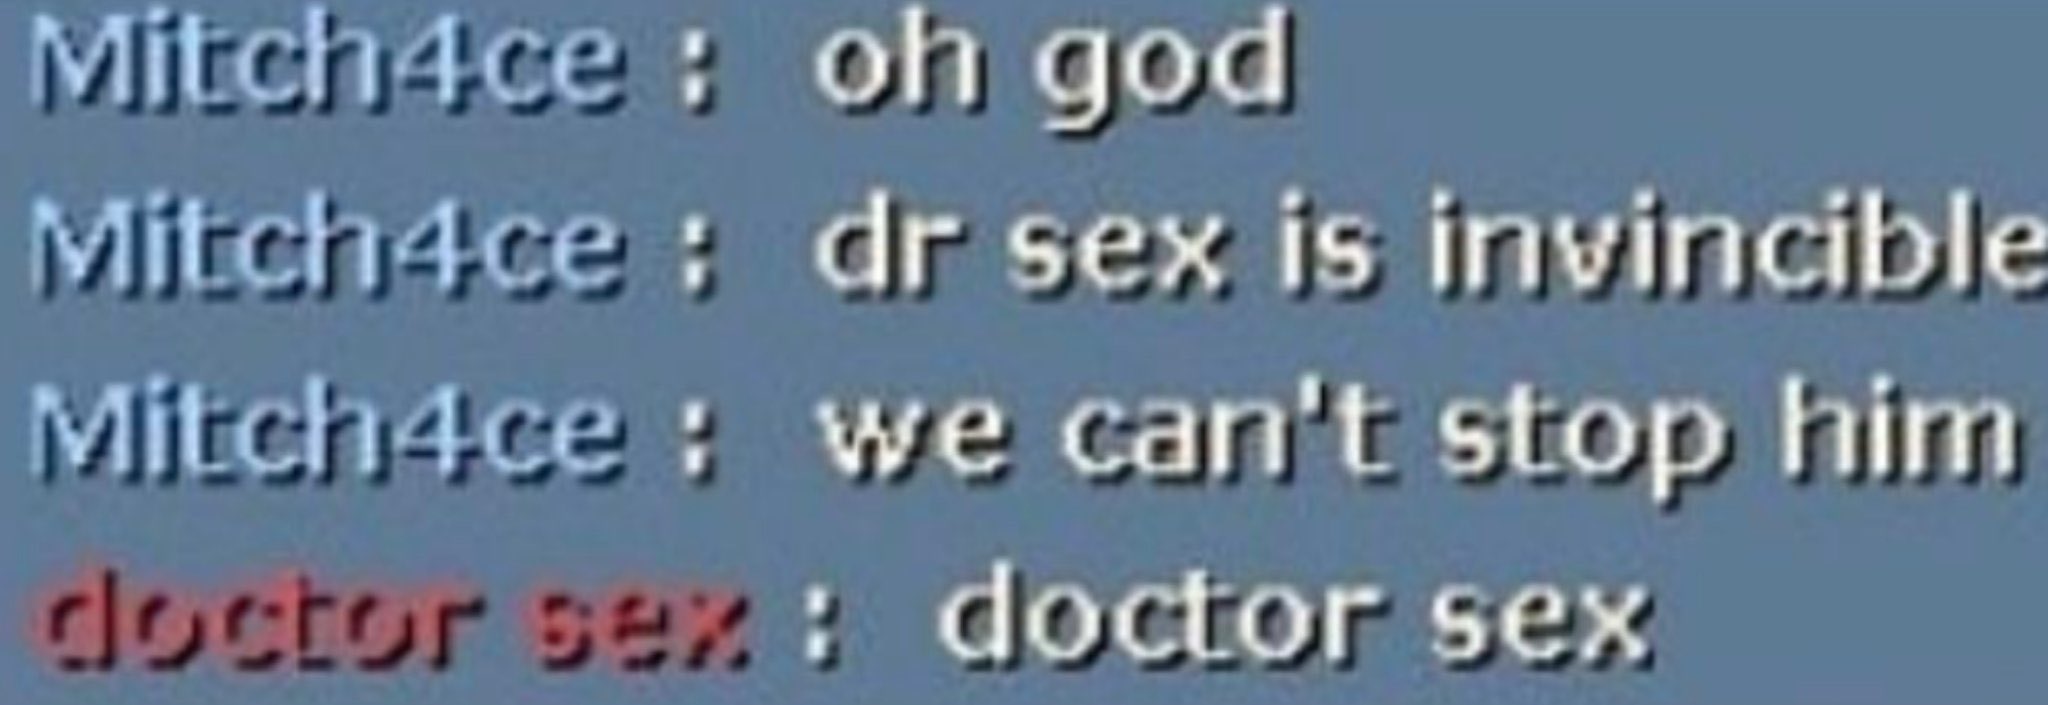 Reactions On Twitter Oh God Dr Sex Is Invincible We Can’t Stop Him Chat Doctor Sex Saying